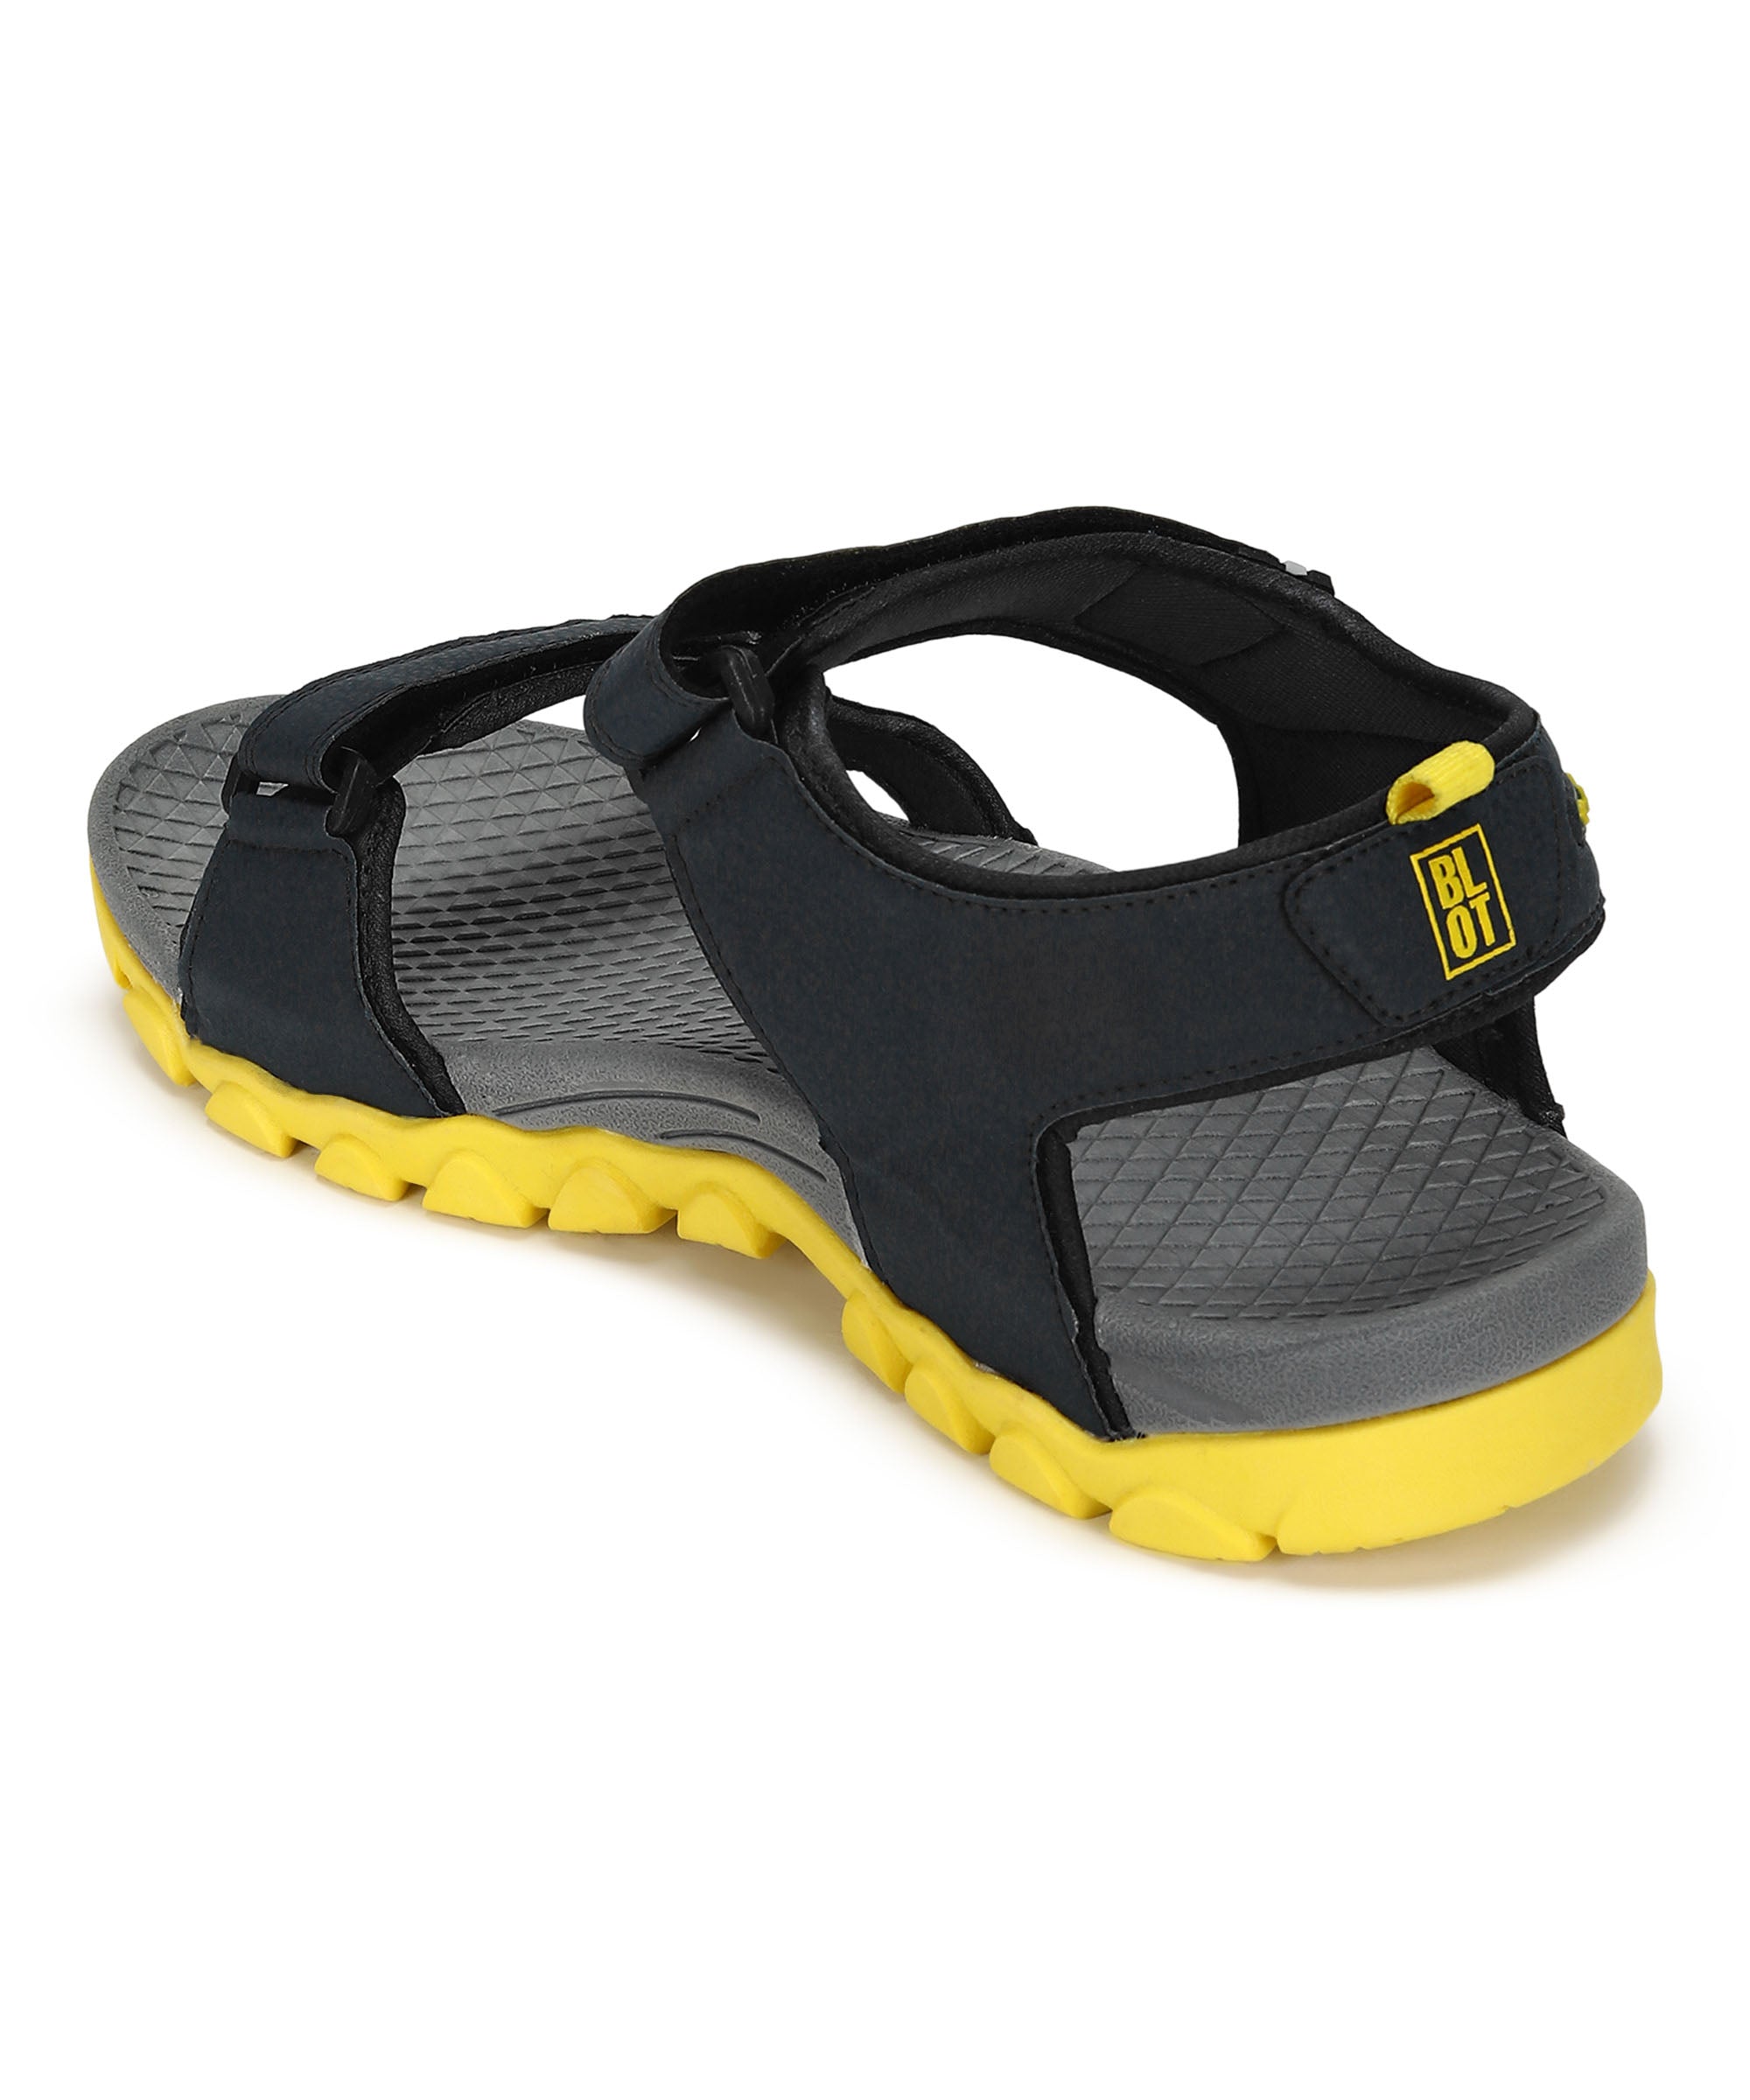 Paragon Blot K1424G Men Stylish Sandals | Comfortable Sandals for Daily Outdoor Use | Casual Formal Sandals with Cushioned Soles